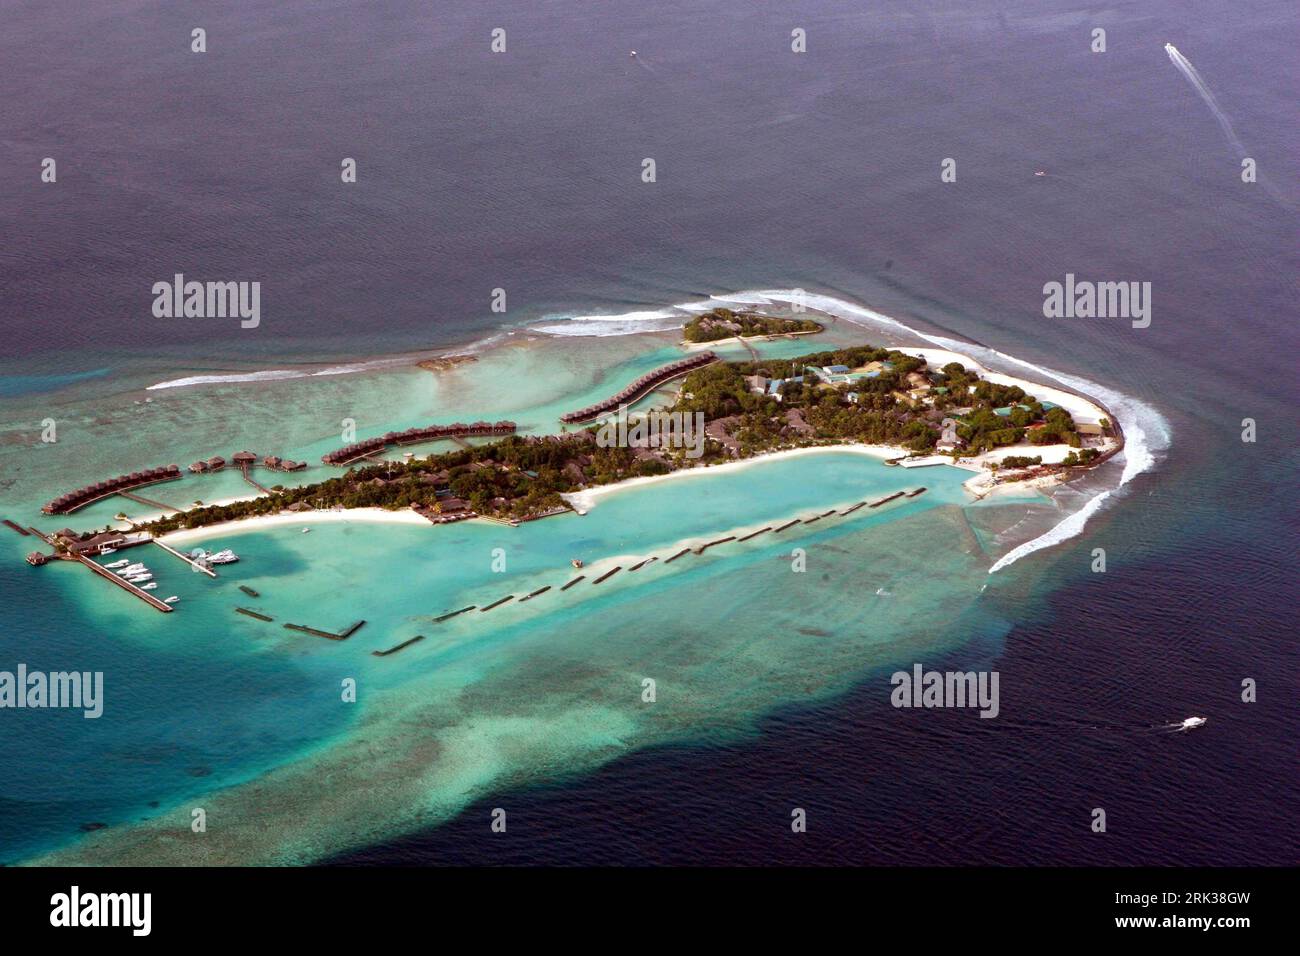 Bildnummer: 53358839  Datum: 14.09.2009  Copyright: imago/Xinhua (090914) -- MALE, Sept. 14, 2009 (Xinhua) -- The aerial photo taken on Sept. 7, 2009 shows an island of Maldives. Some scientists warned that Maldives would be engulfed by the rising sea levels if global warming could not be kept within limits. (Xinhua/Chen Zhanjie) (msq) (1)MALDIVES-CLIMATE CHANGE-WARNING PUBLICATIONxNOTxINxCHN kbdig xkg 2009 quer o0 Landschaft Reisen Insel Meer Luftbild o00 Vogelperspektive    Bildnummer 53358839 Date 14 09 2009 Copyright Imago XINHUA  Male Sept 14 2009 XINHUA The Aerial Photo Taken ON Sept 7 2 Stock Photo